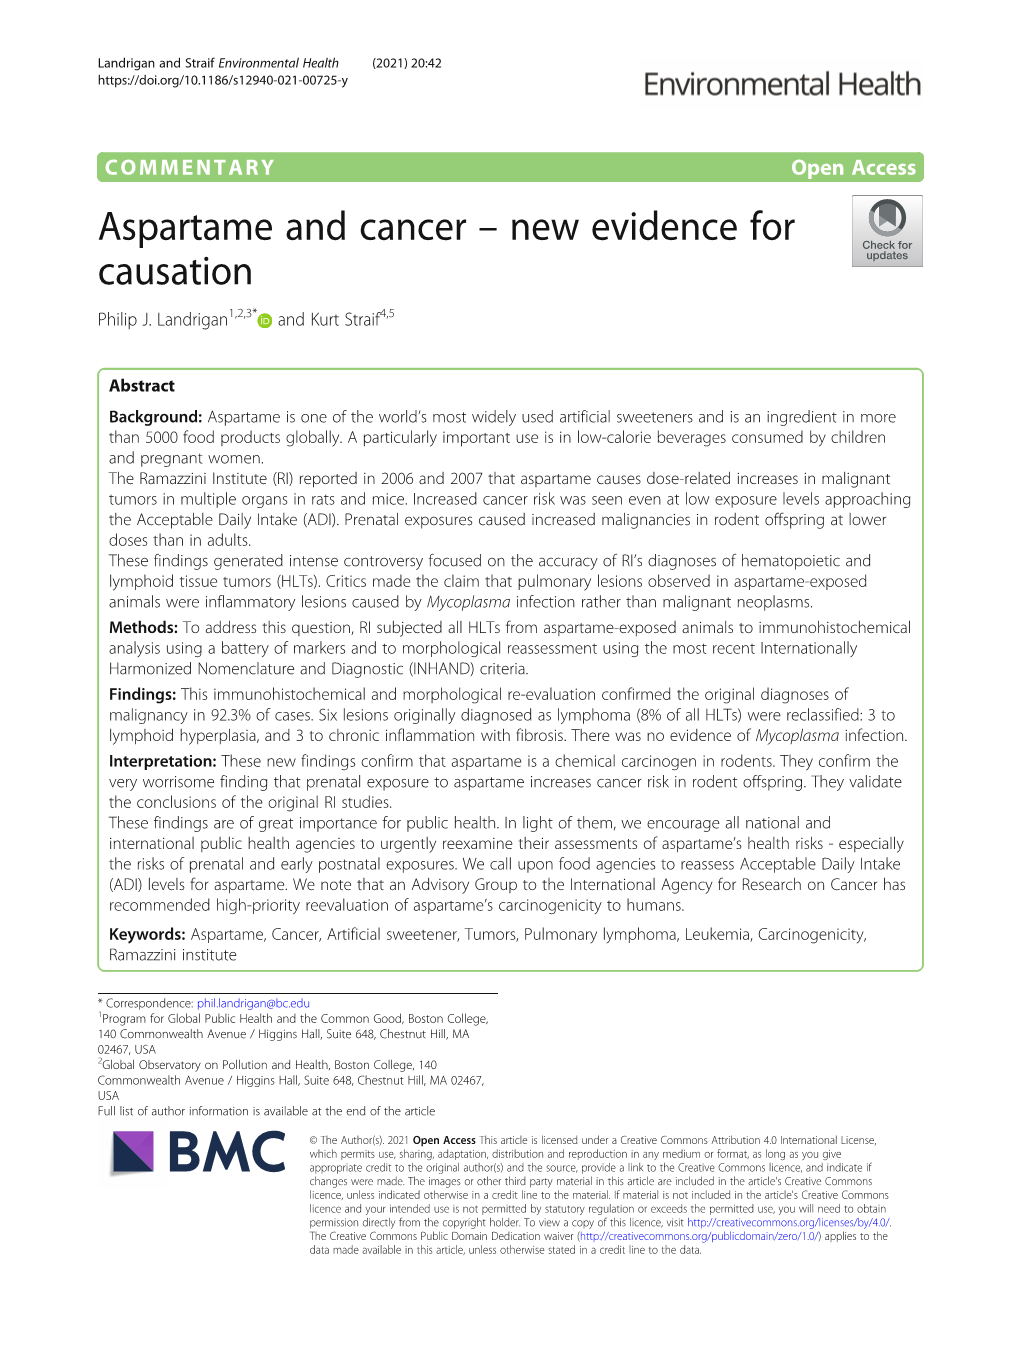 Aspartame and Cancer – New Evidence for Causation Philip J